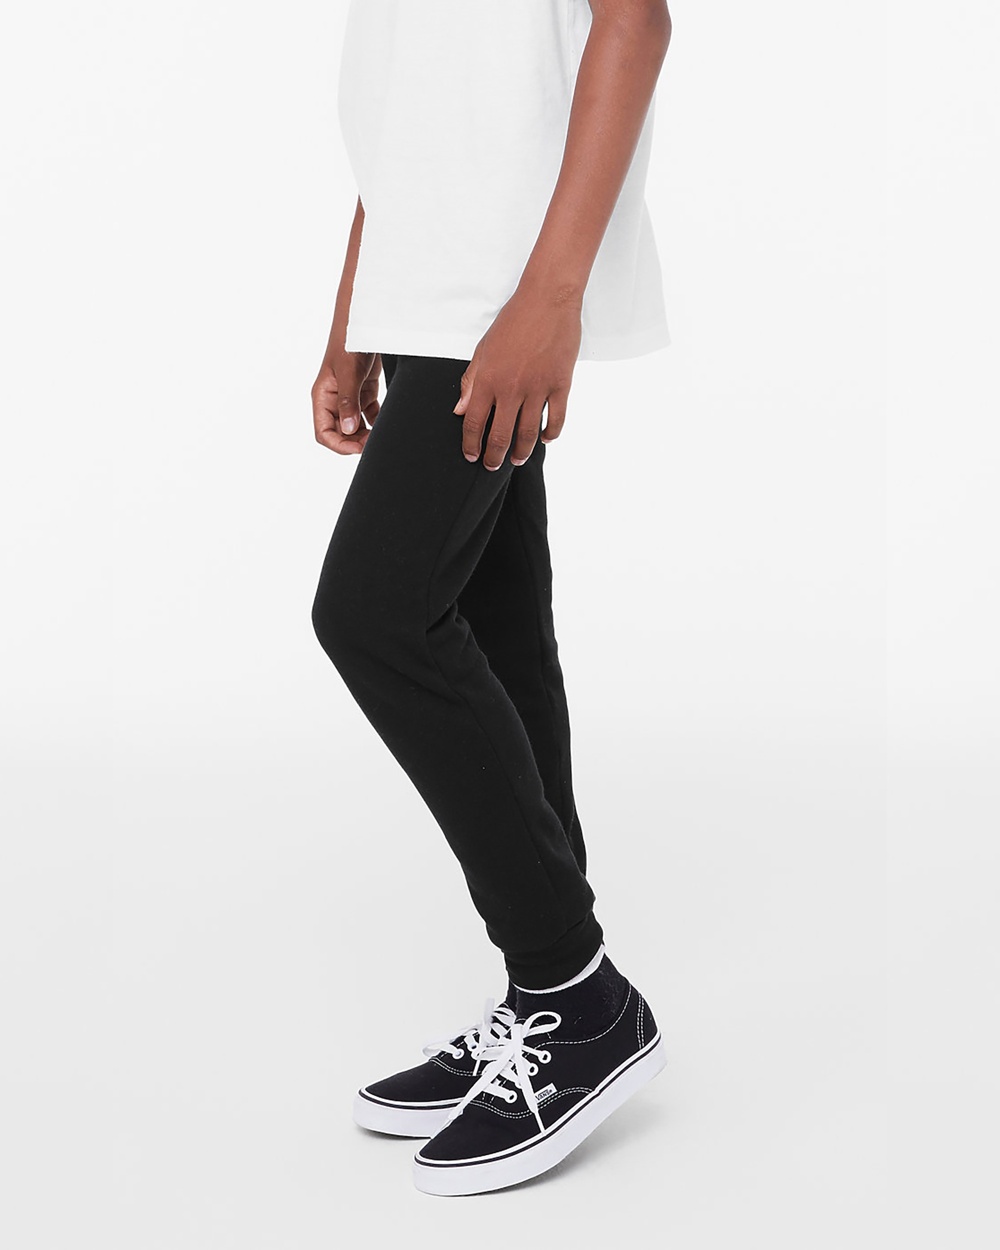 CV881 - Youth Jogger Sweatpants - One Stop